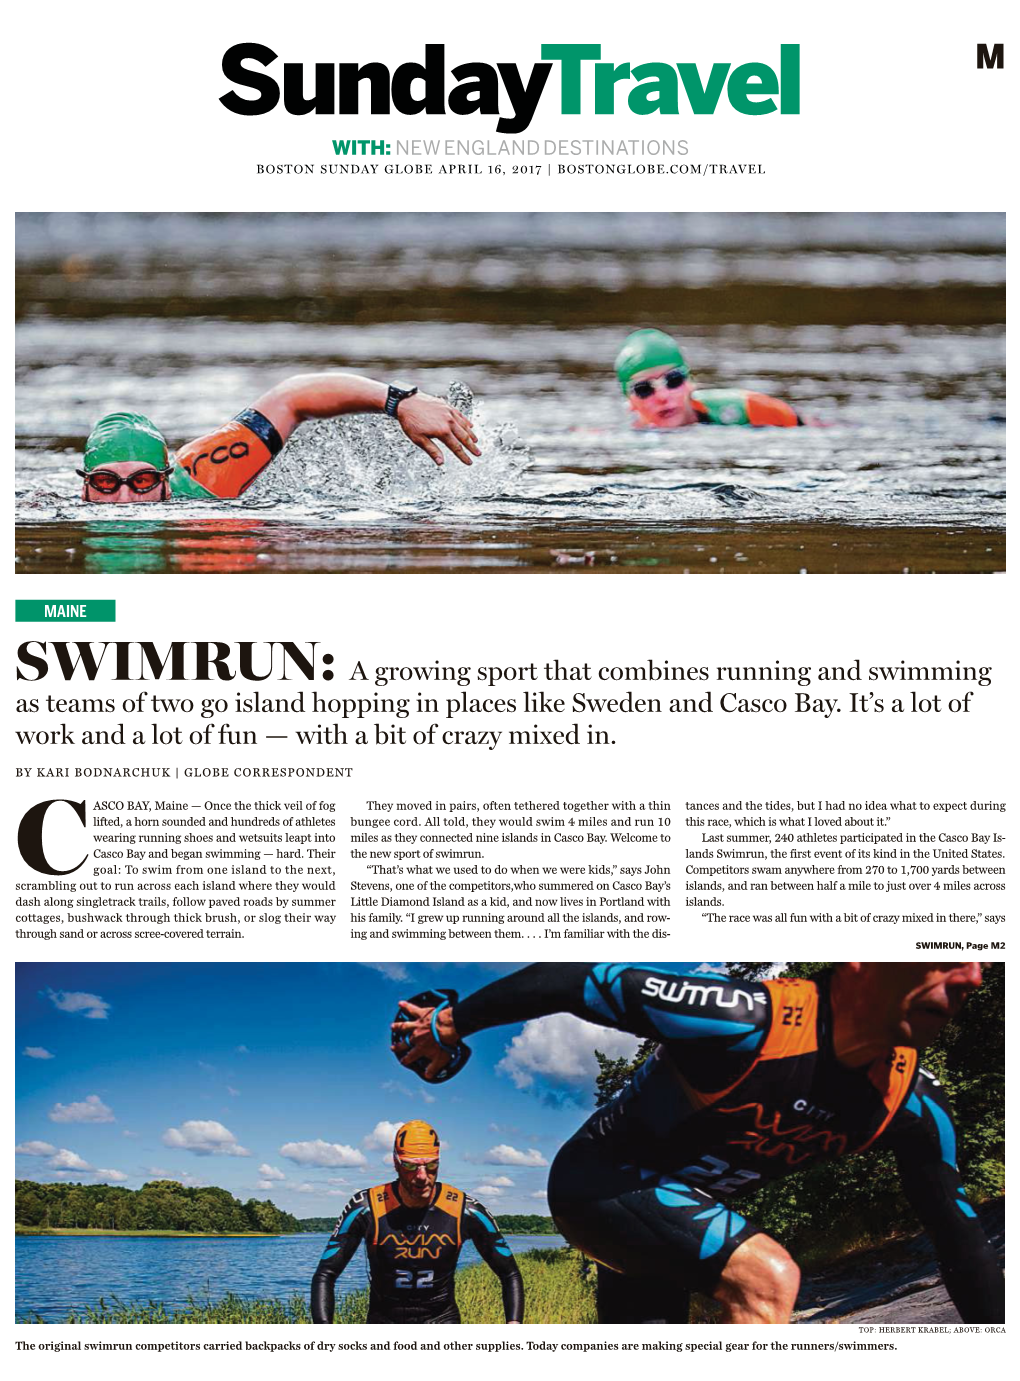 SWIMRUN: a Growing Sport That Combines Running and Swimming As Teams of Two Go Island Hopping in Places Like Sweden and Casco Bay